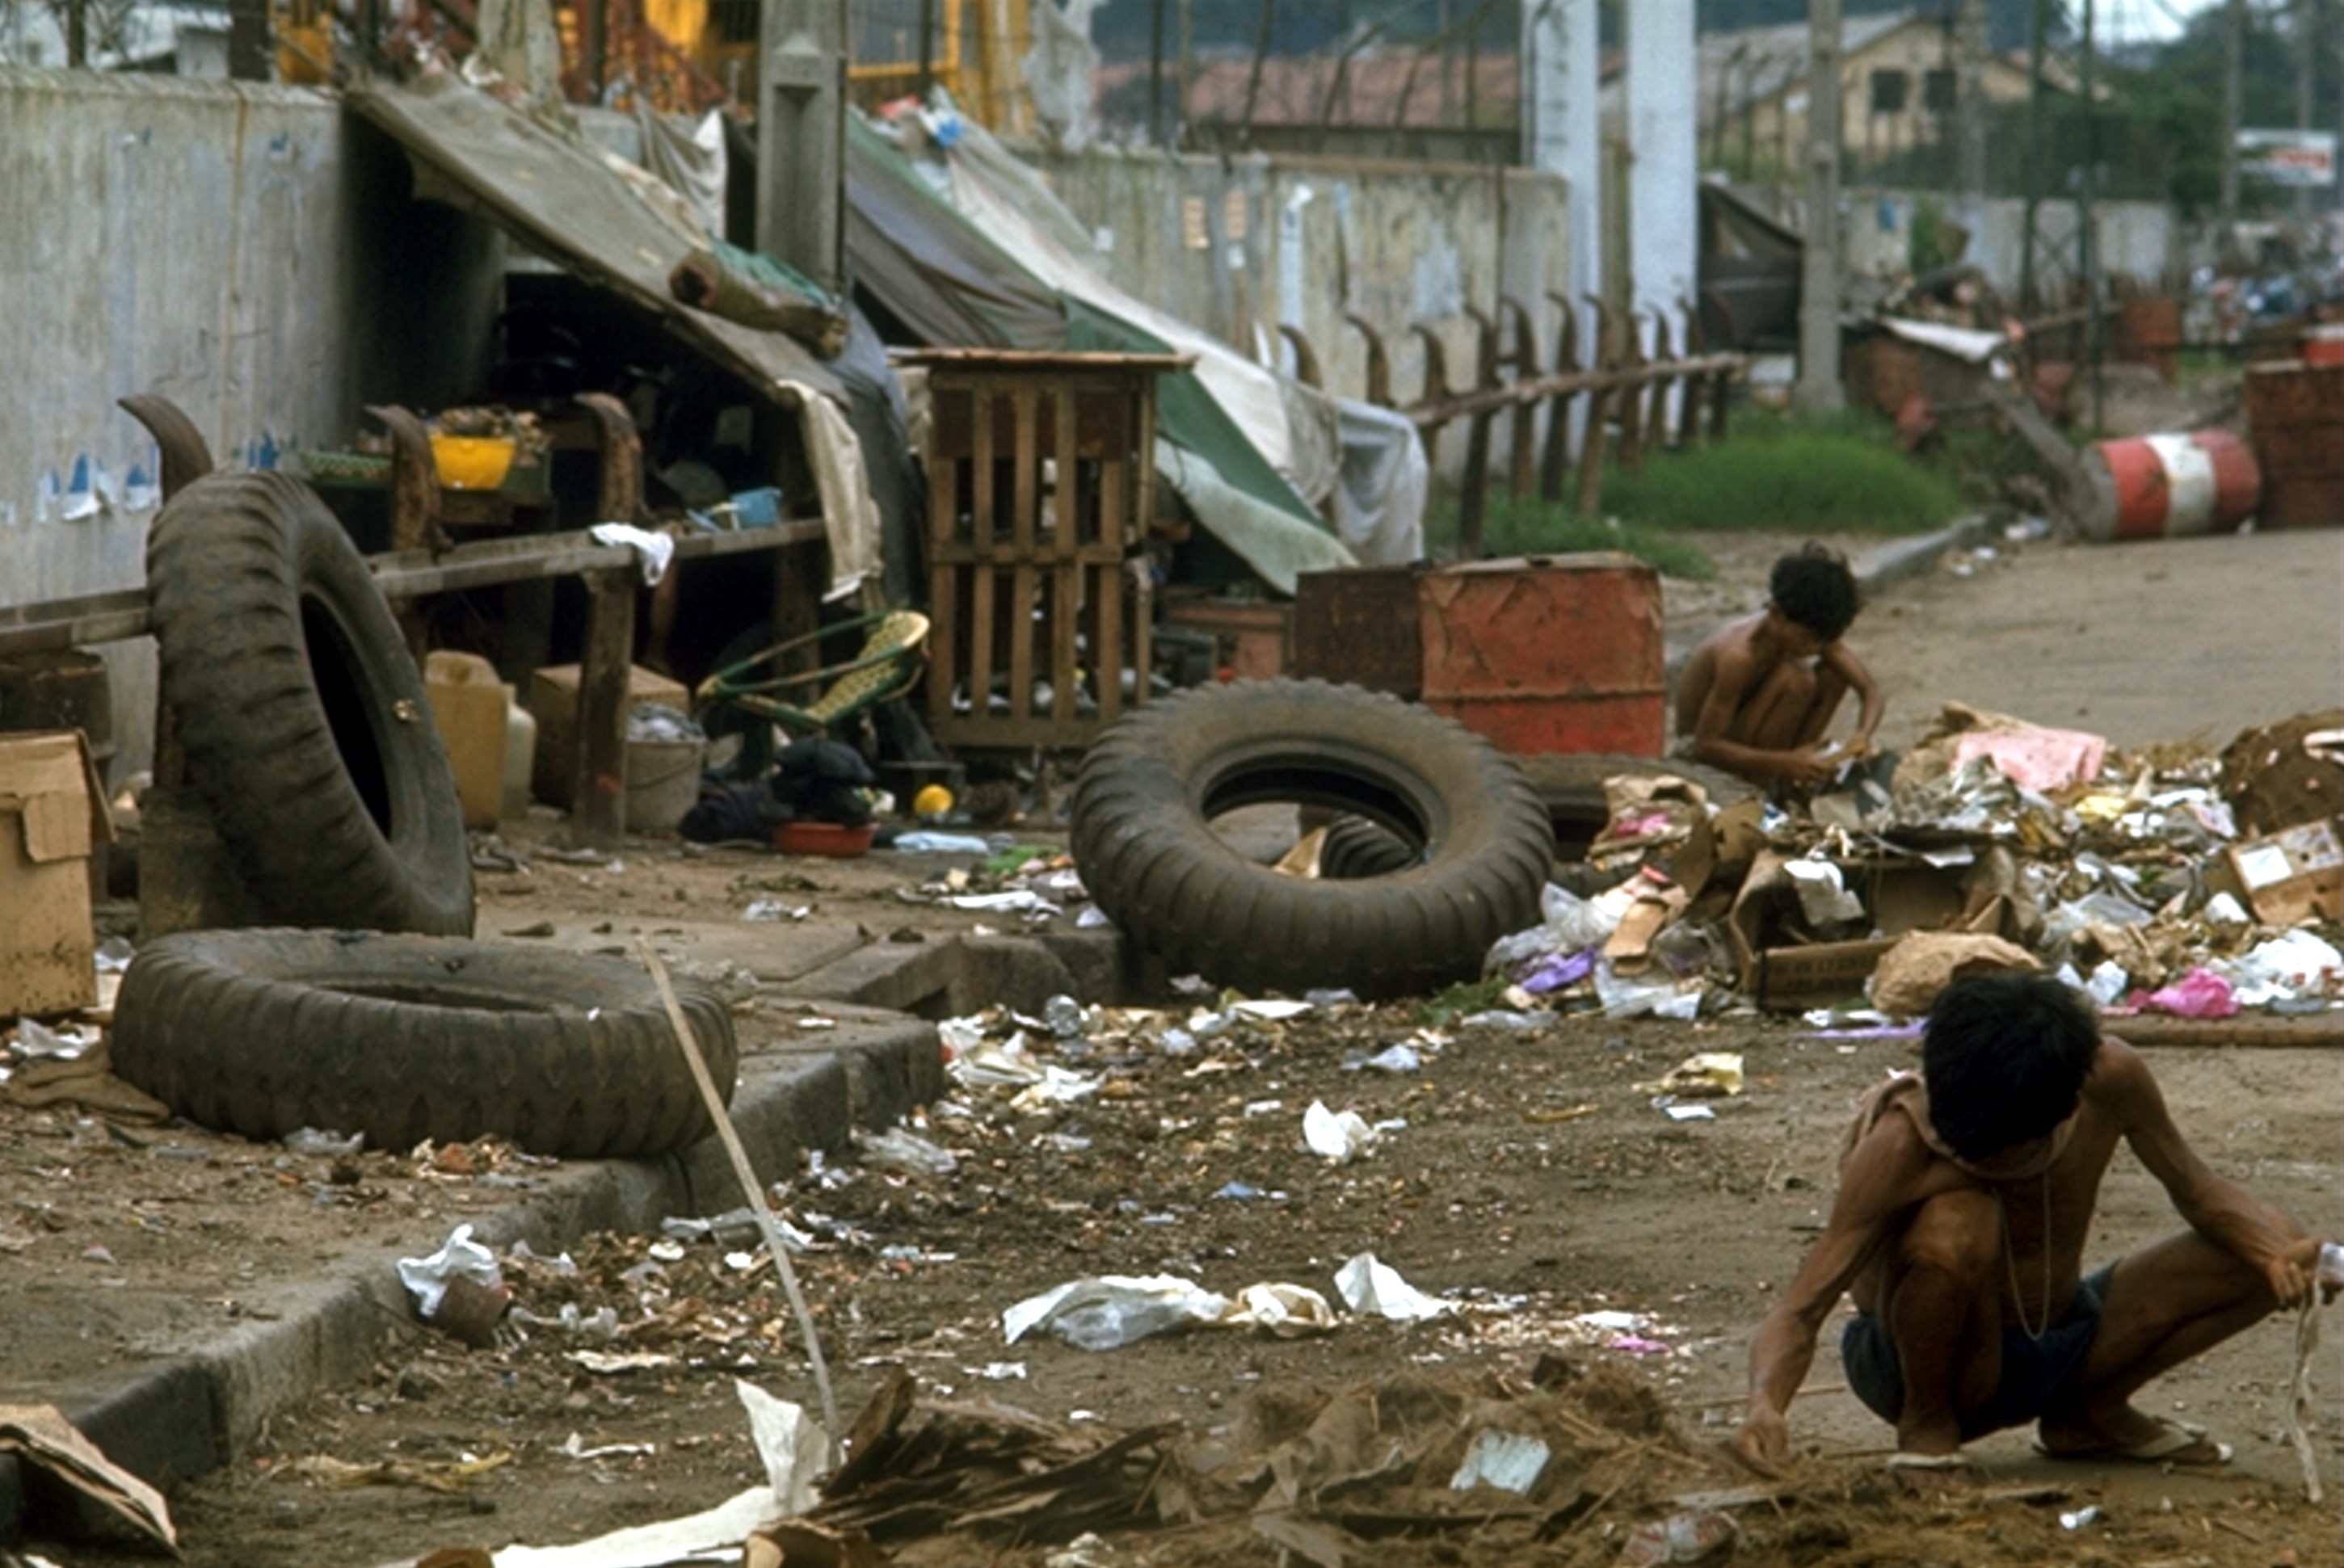 where I learned people could be real poor Saigon 1970